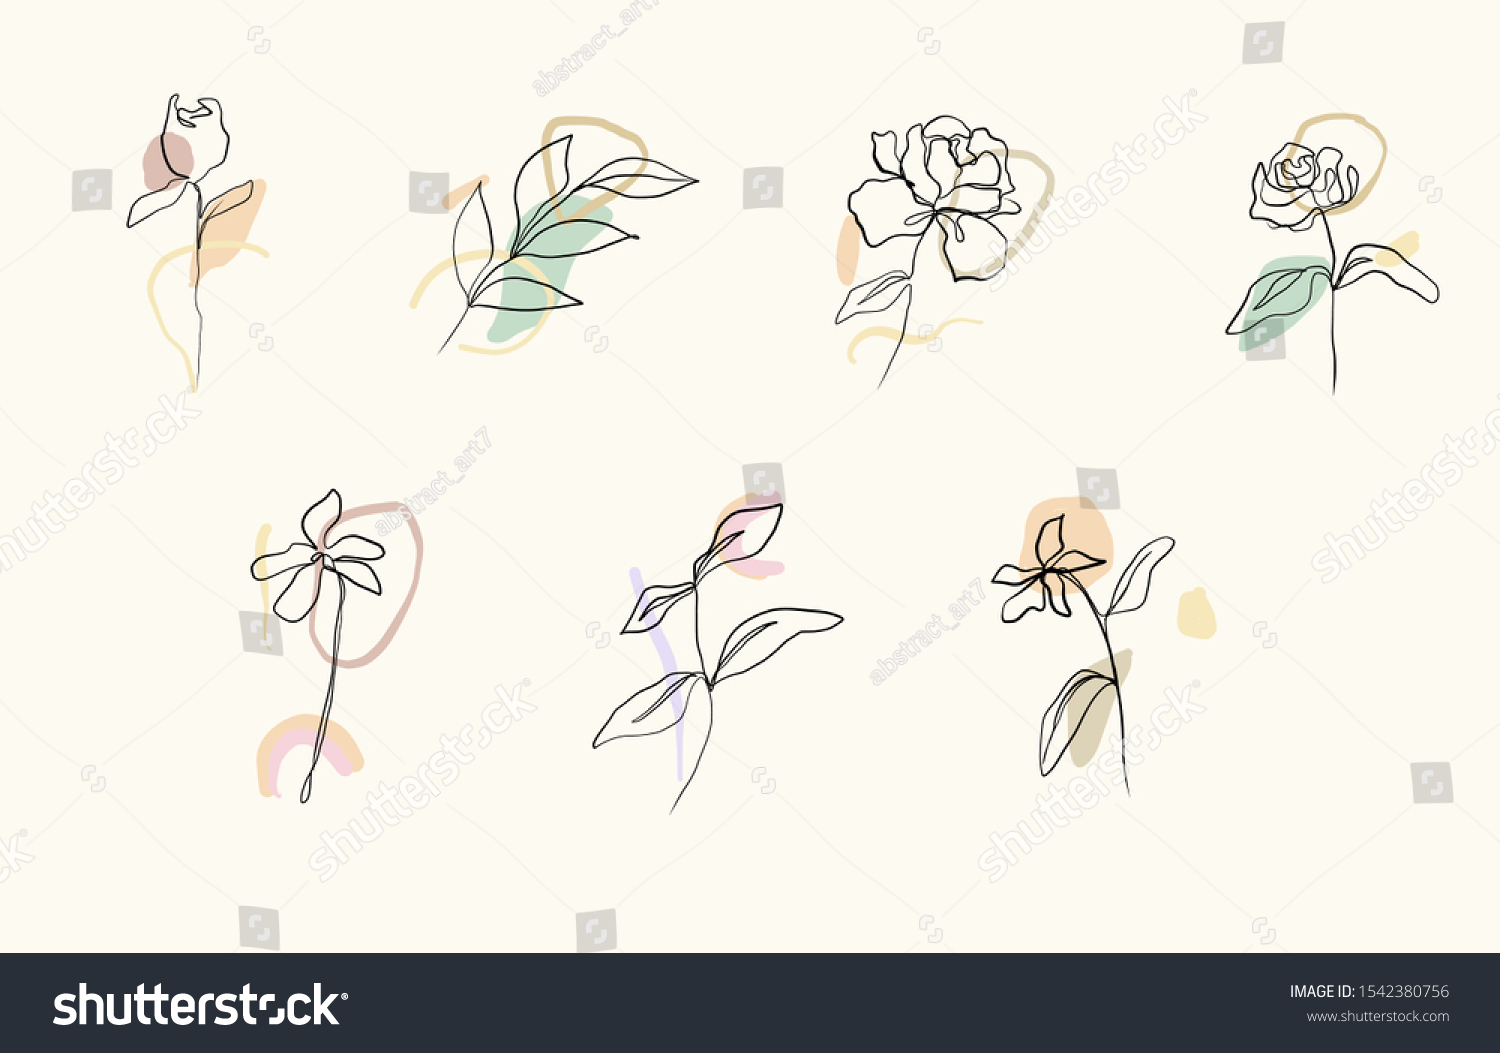 Eco simple logo. Minimalism line drawing. Flowers one line continuous art #1542380756